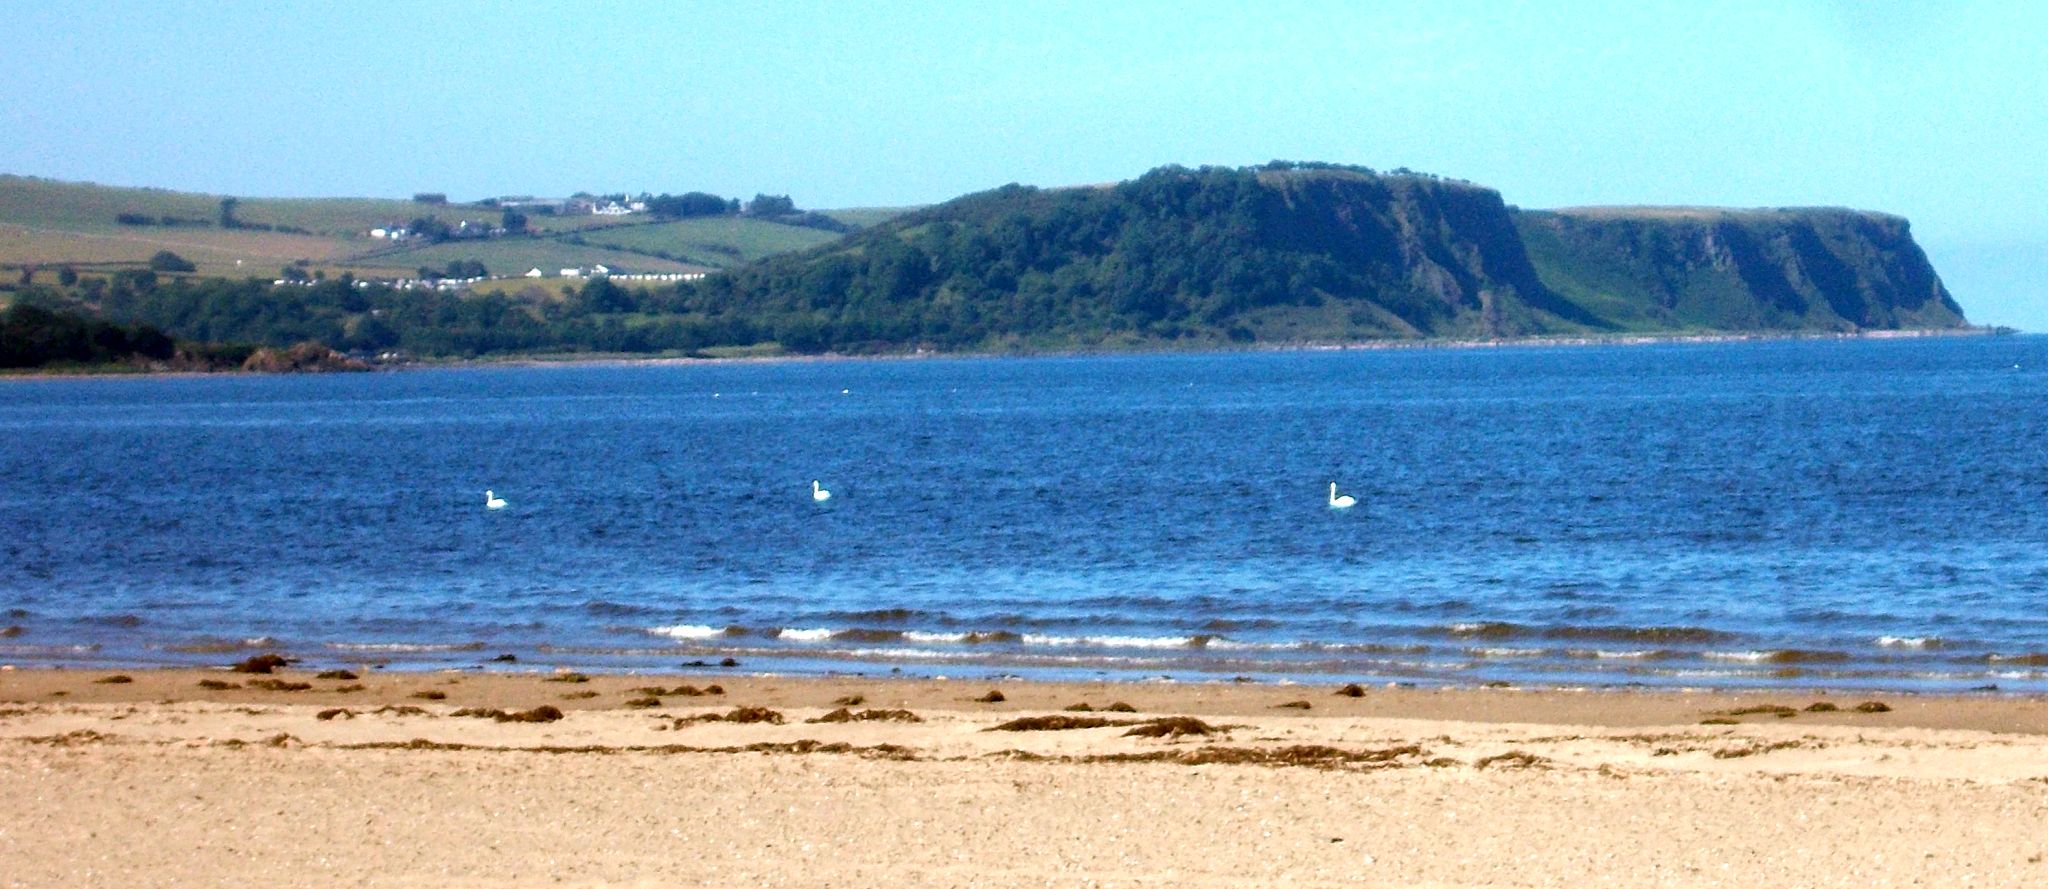 "Heads of Ayr" from the seafront at Ayr